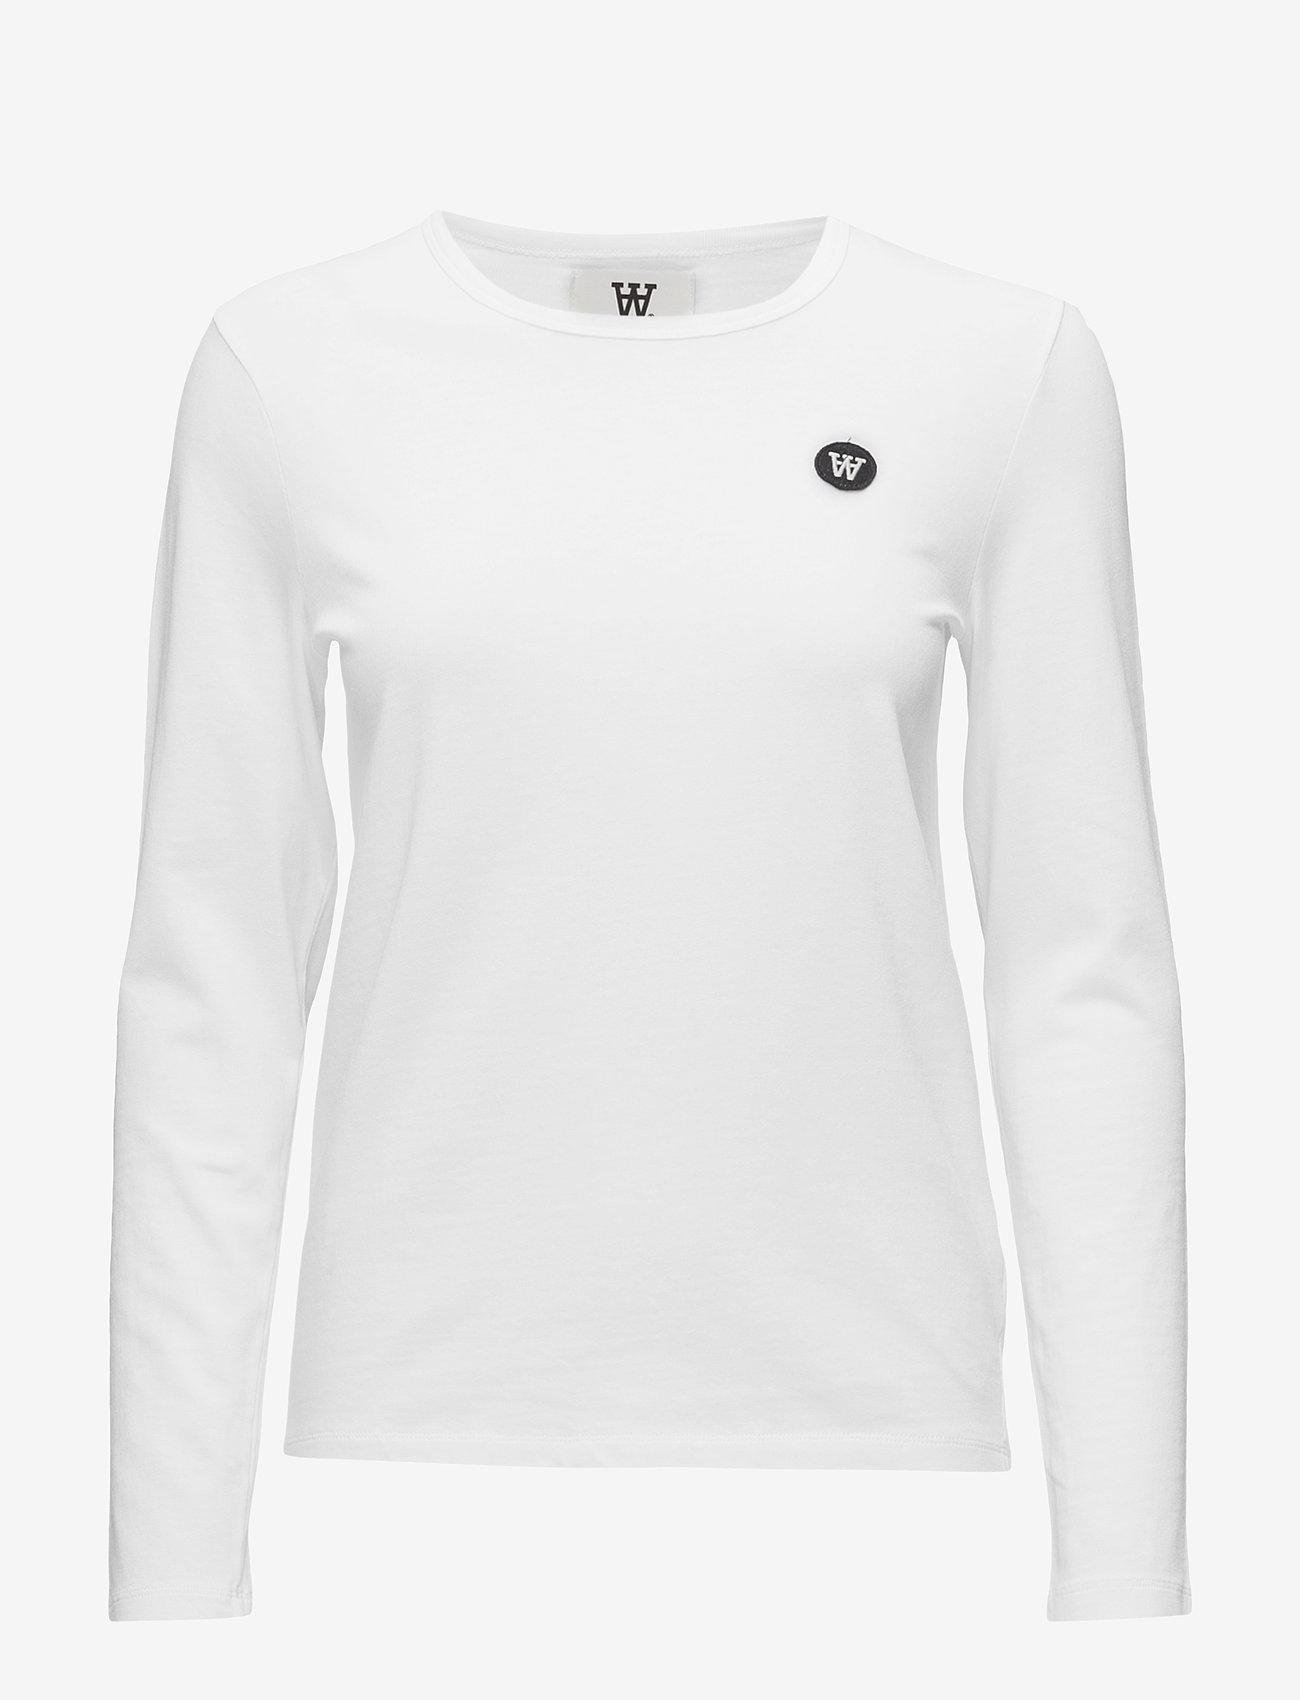 Double A by Wood Wood - Moa long sleeve GOTS - langærmede toppe - bright white - 0